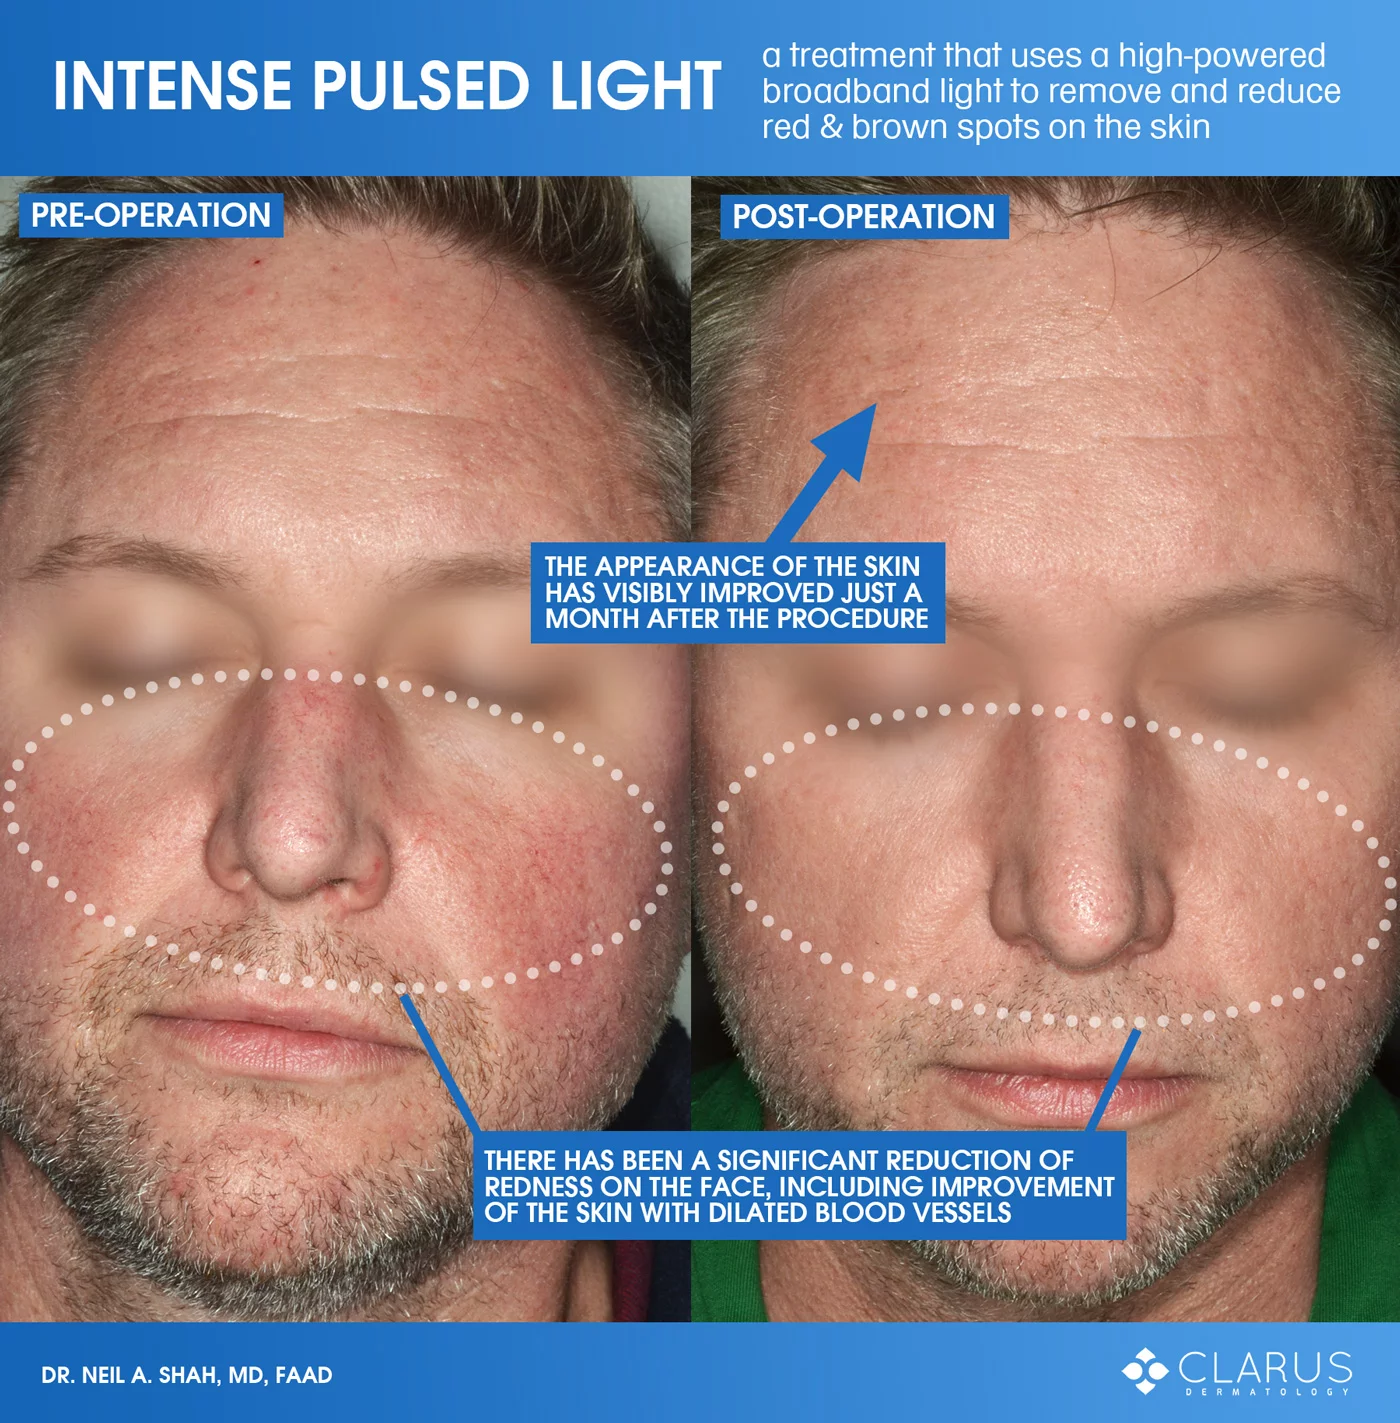 If IPL treatment sounds familiar, it might be because you’ve seen images that we’ve posted before to demonstrate how IPL reduced red and brown spots on our patient’s skin.